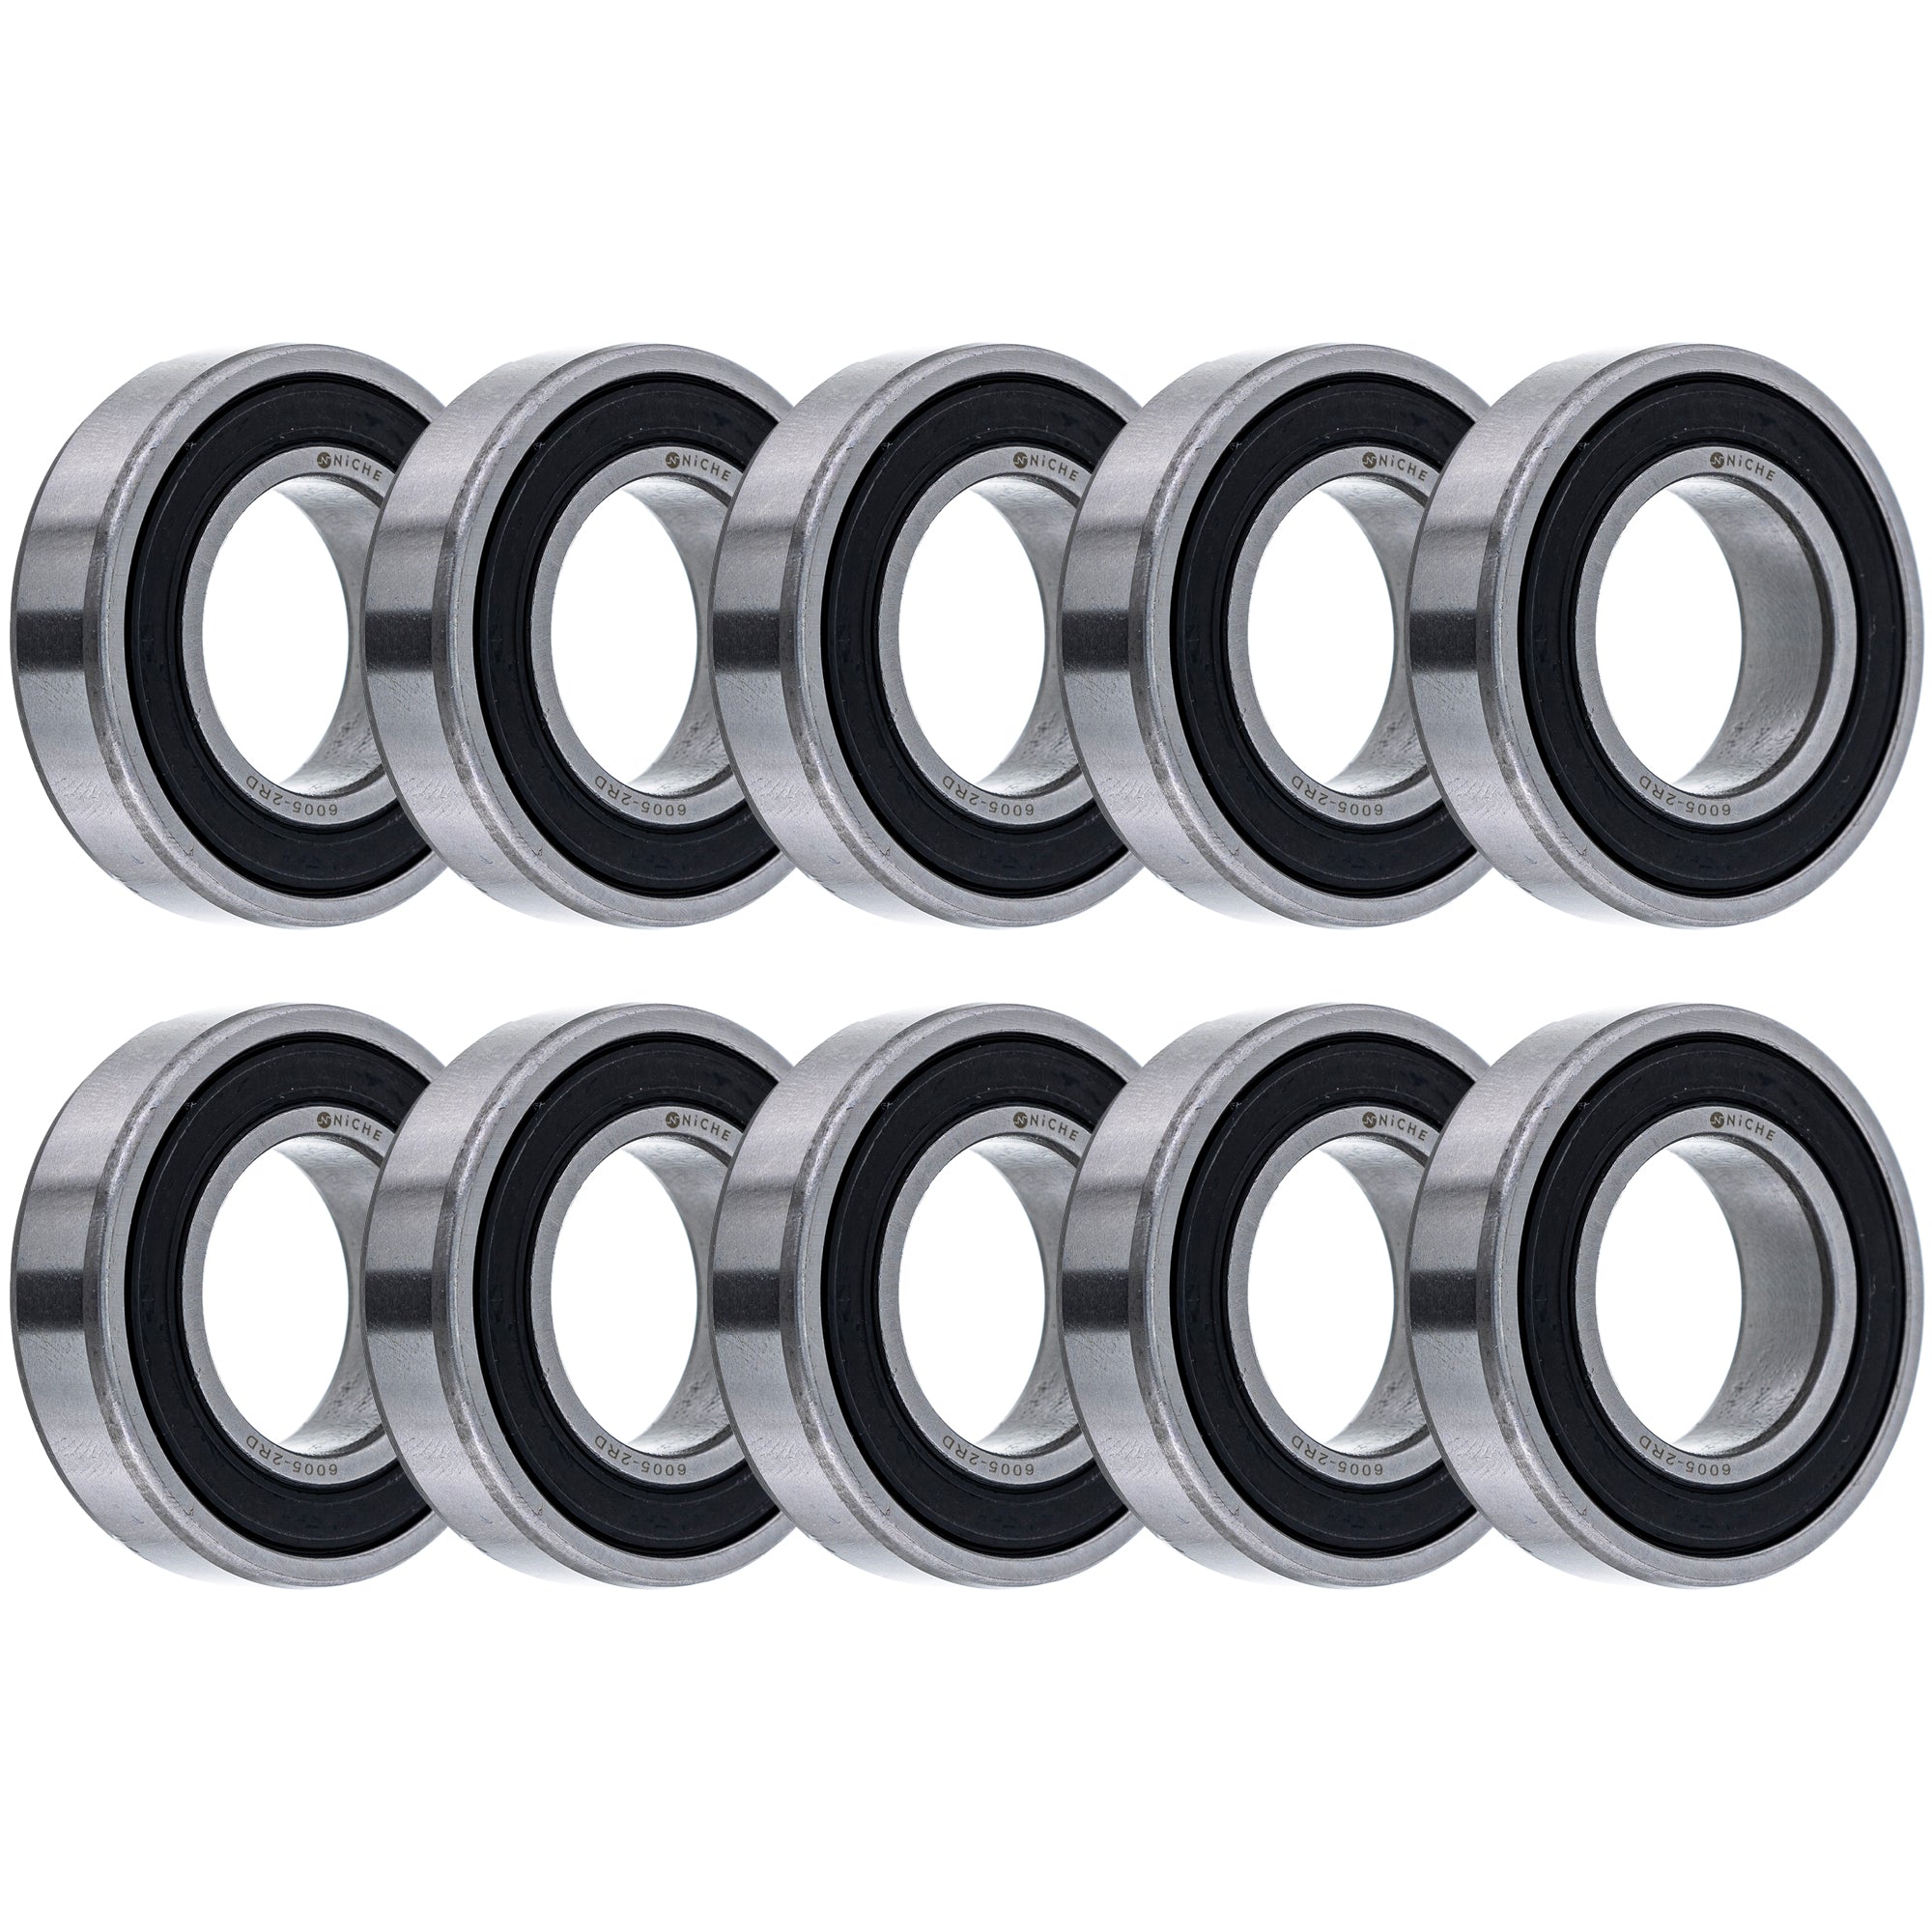 Electric Grade, Single Row, Deep Groove, Ball Bearing Pack of 10 10-Pack for zOTHER NICHE 519-CBB2339R